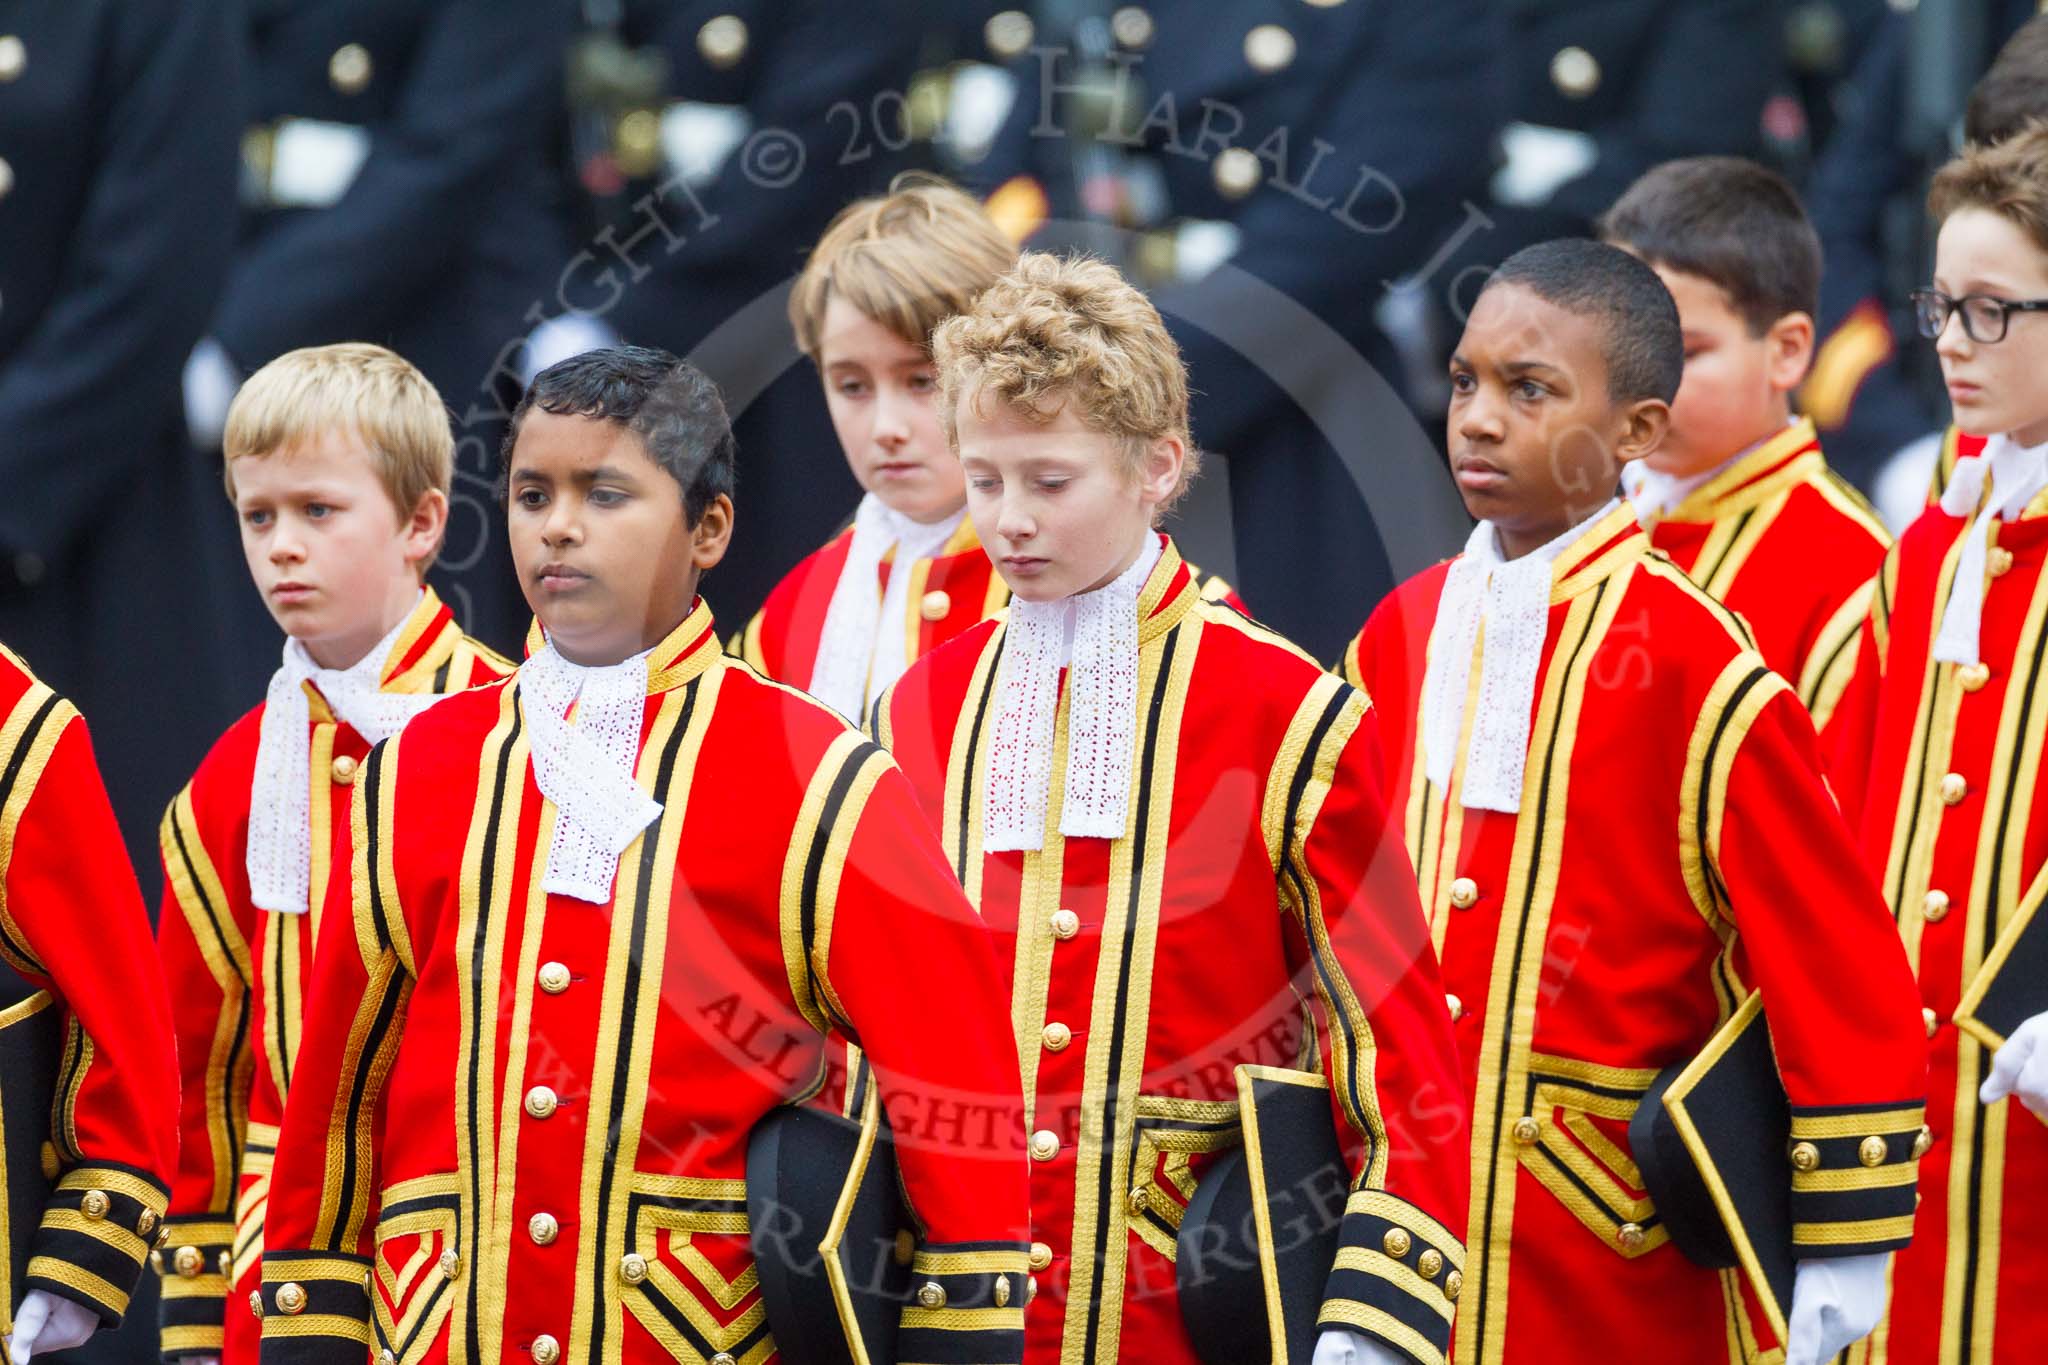 Remembrance Sunday at the Cenotaph 2015: The 10 Children of the Chapel Royal on their way from the Foreign- and Commonwealth Office building onto Whitehall. Image #79, 08 November 2015 10:54 Whitehall, London, UK